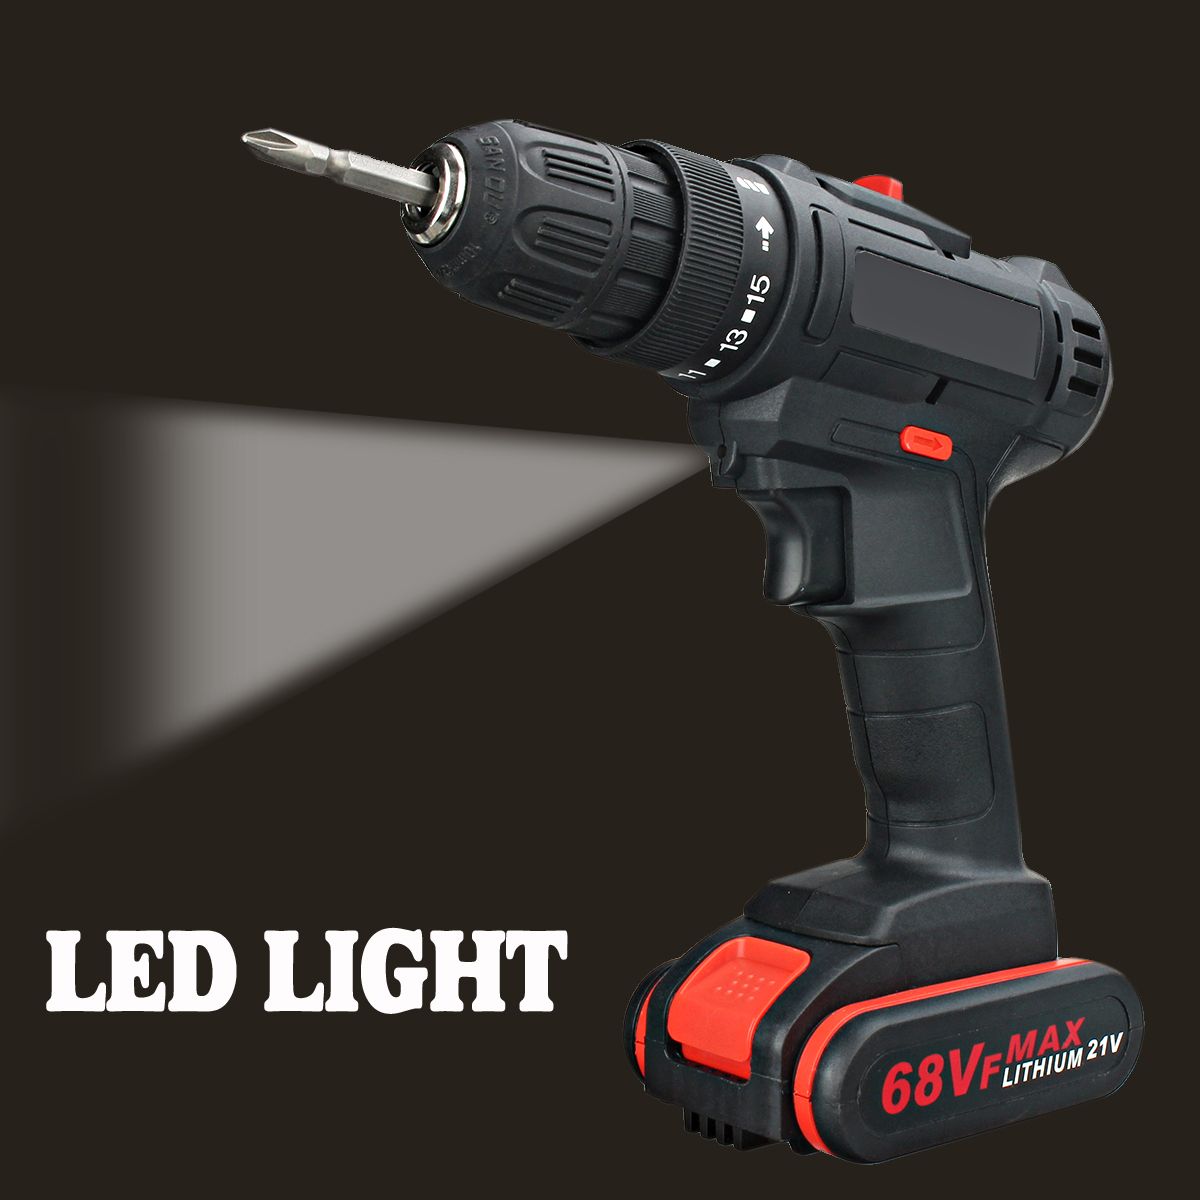 68VF-Cordless-Lithium-Ion-DrillDriver-Rechargable-Electric-Drill-Adjustable-3200rmin-2-Speed-Hand-Dr-1575819